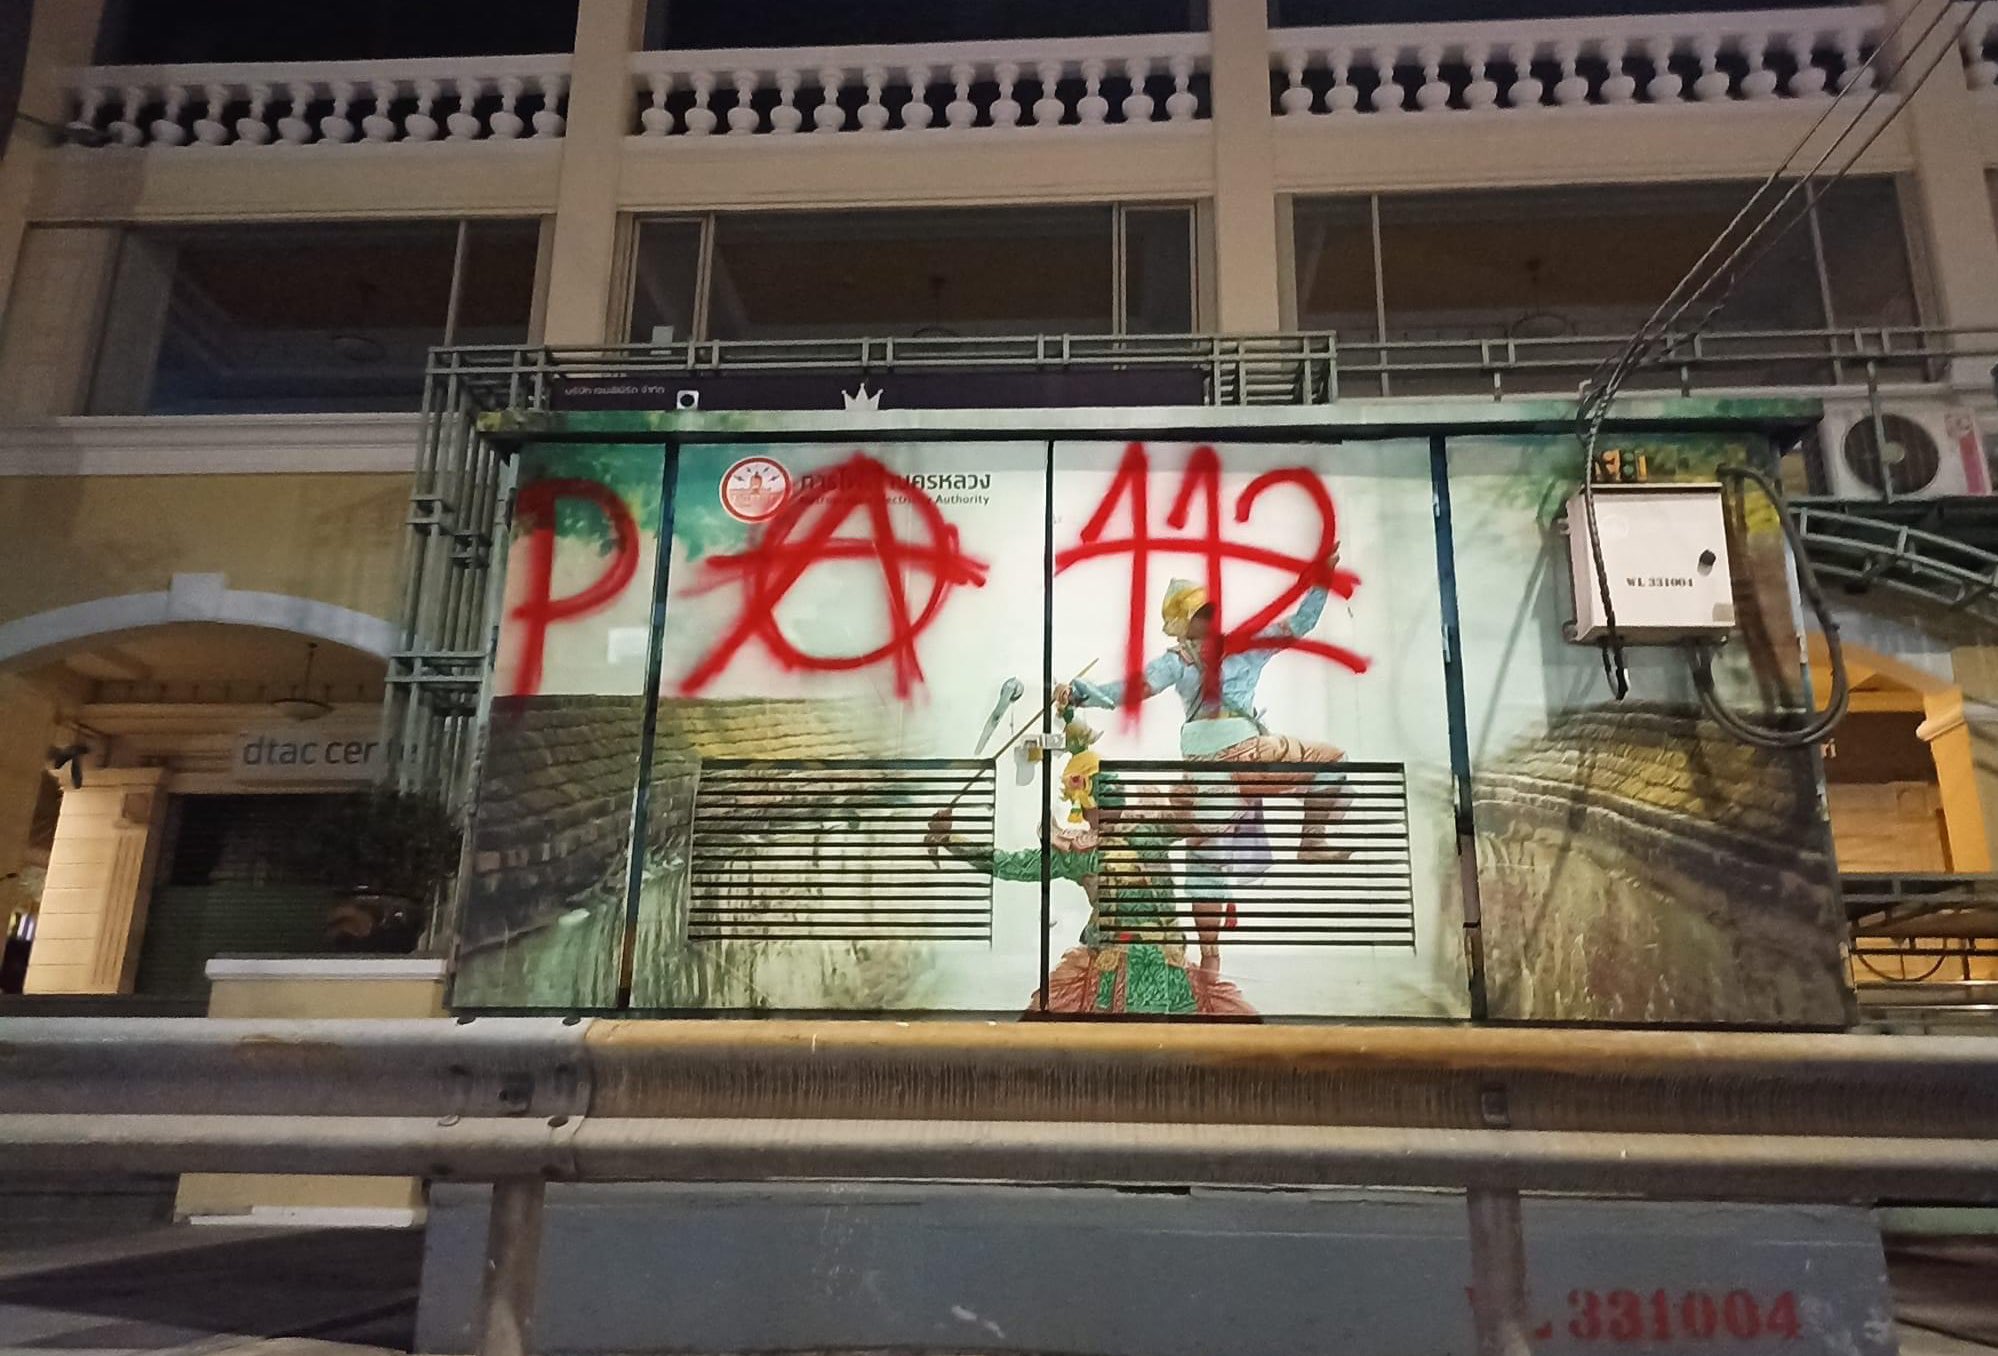 The day after Earn's arrest, anarchist and anti-monarchy symbols were spray painted by members of Thalugaz in other parts of Bangkok. Photo: Thalugaz